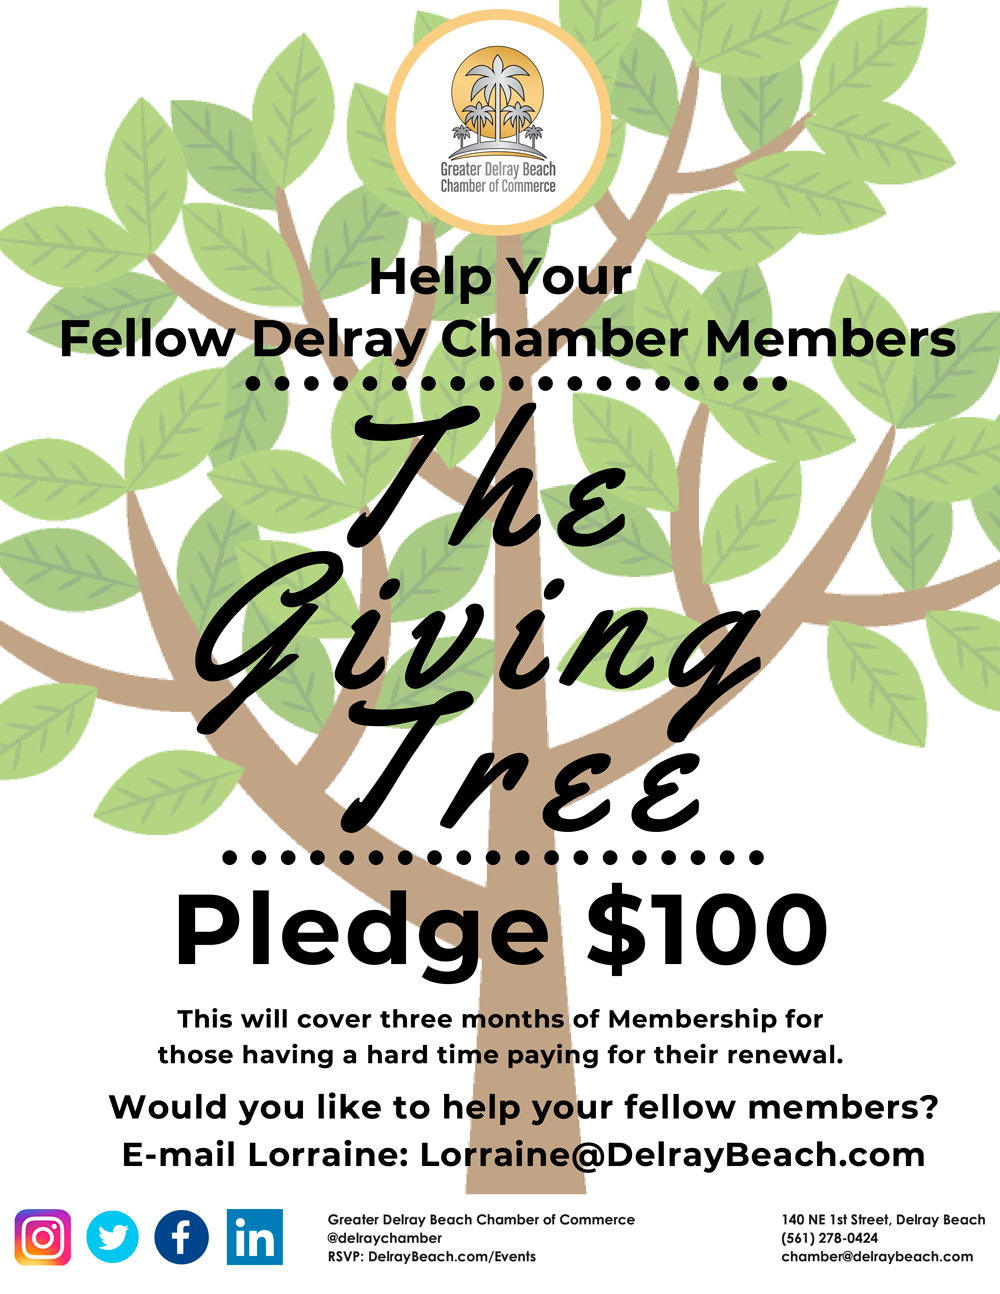 Help Your Fellow Delray Chamber Members